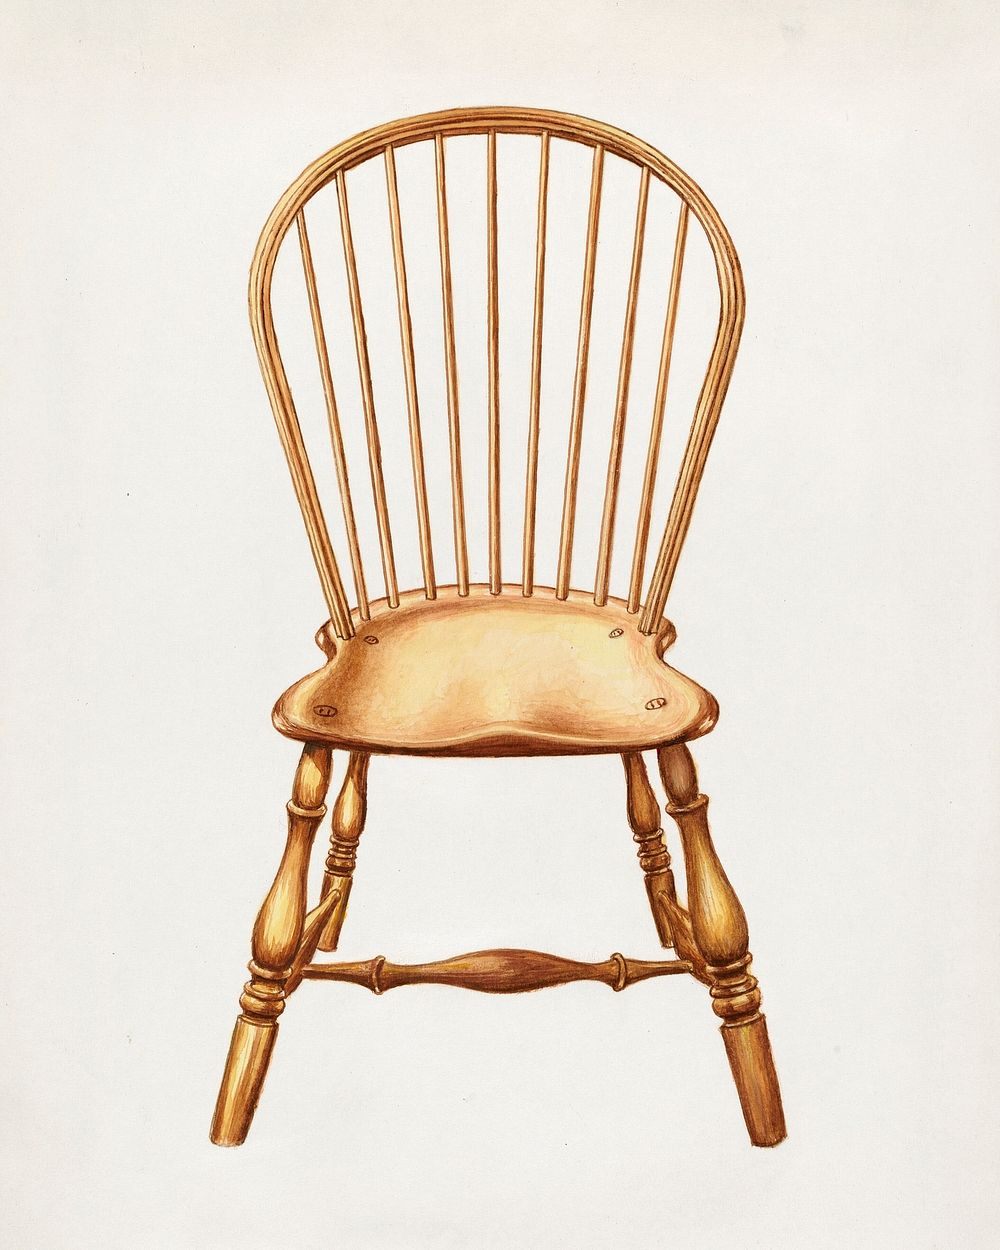 Windsor Chair (ca.1936) by Gerald Bernhardt. Original from The National Gallery of Art. Digitally enhanced by rawpixel.